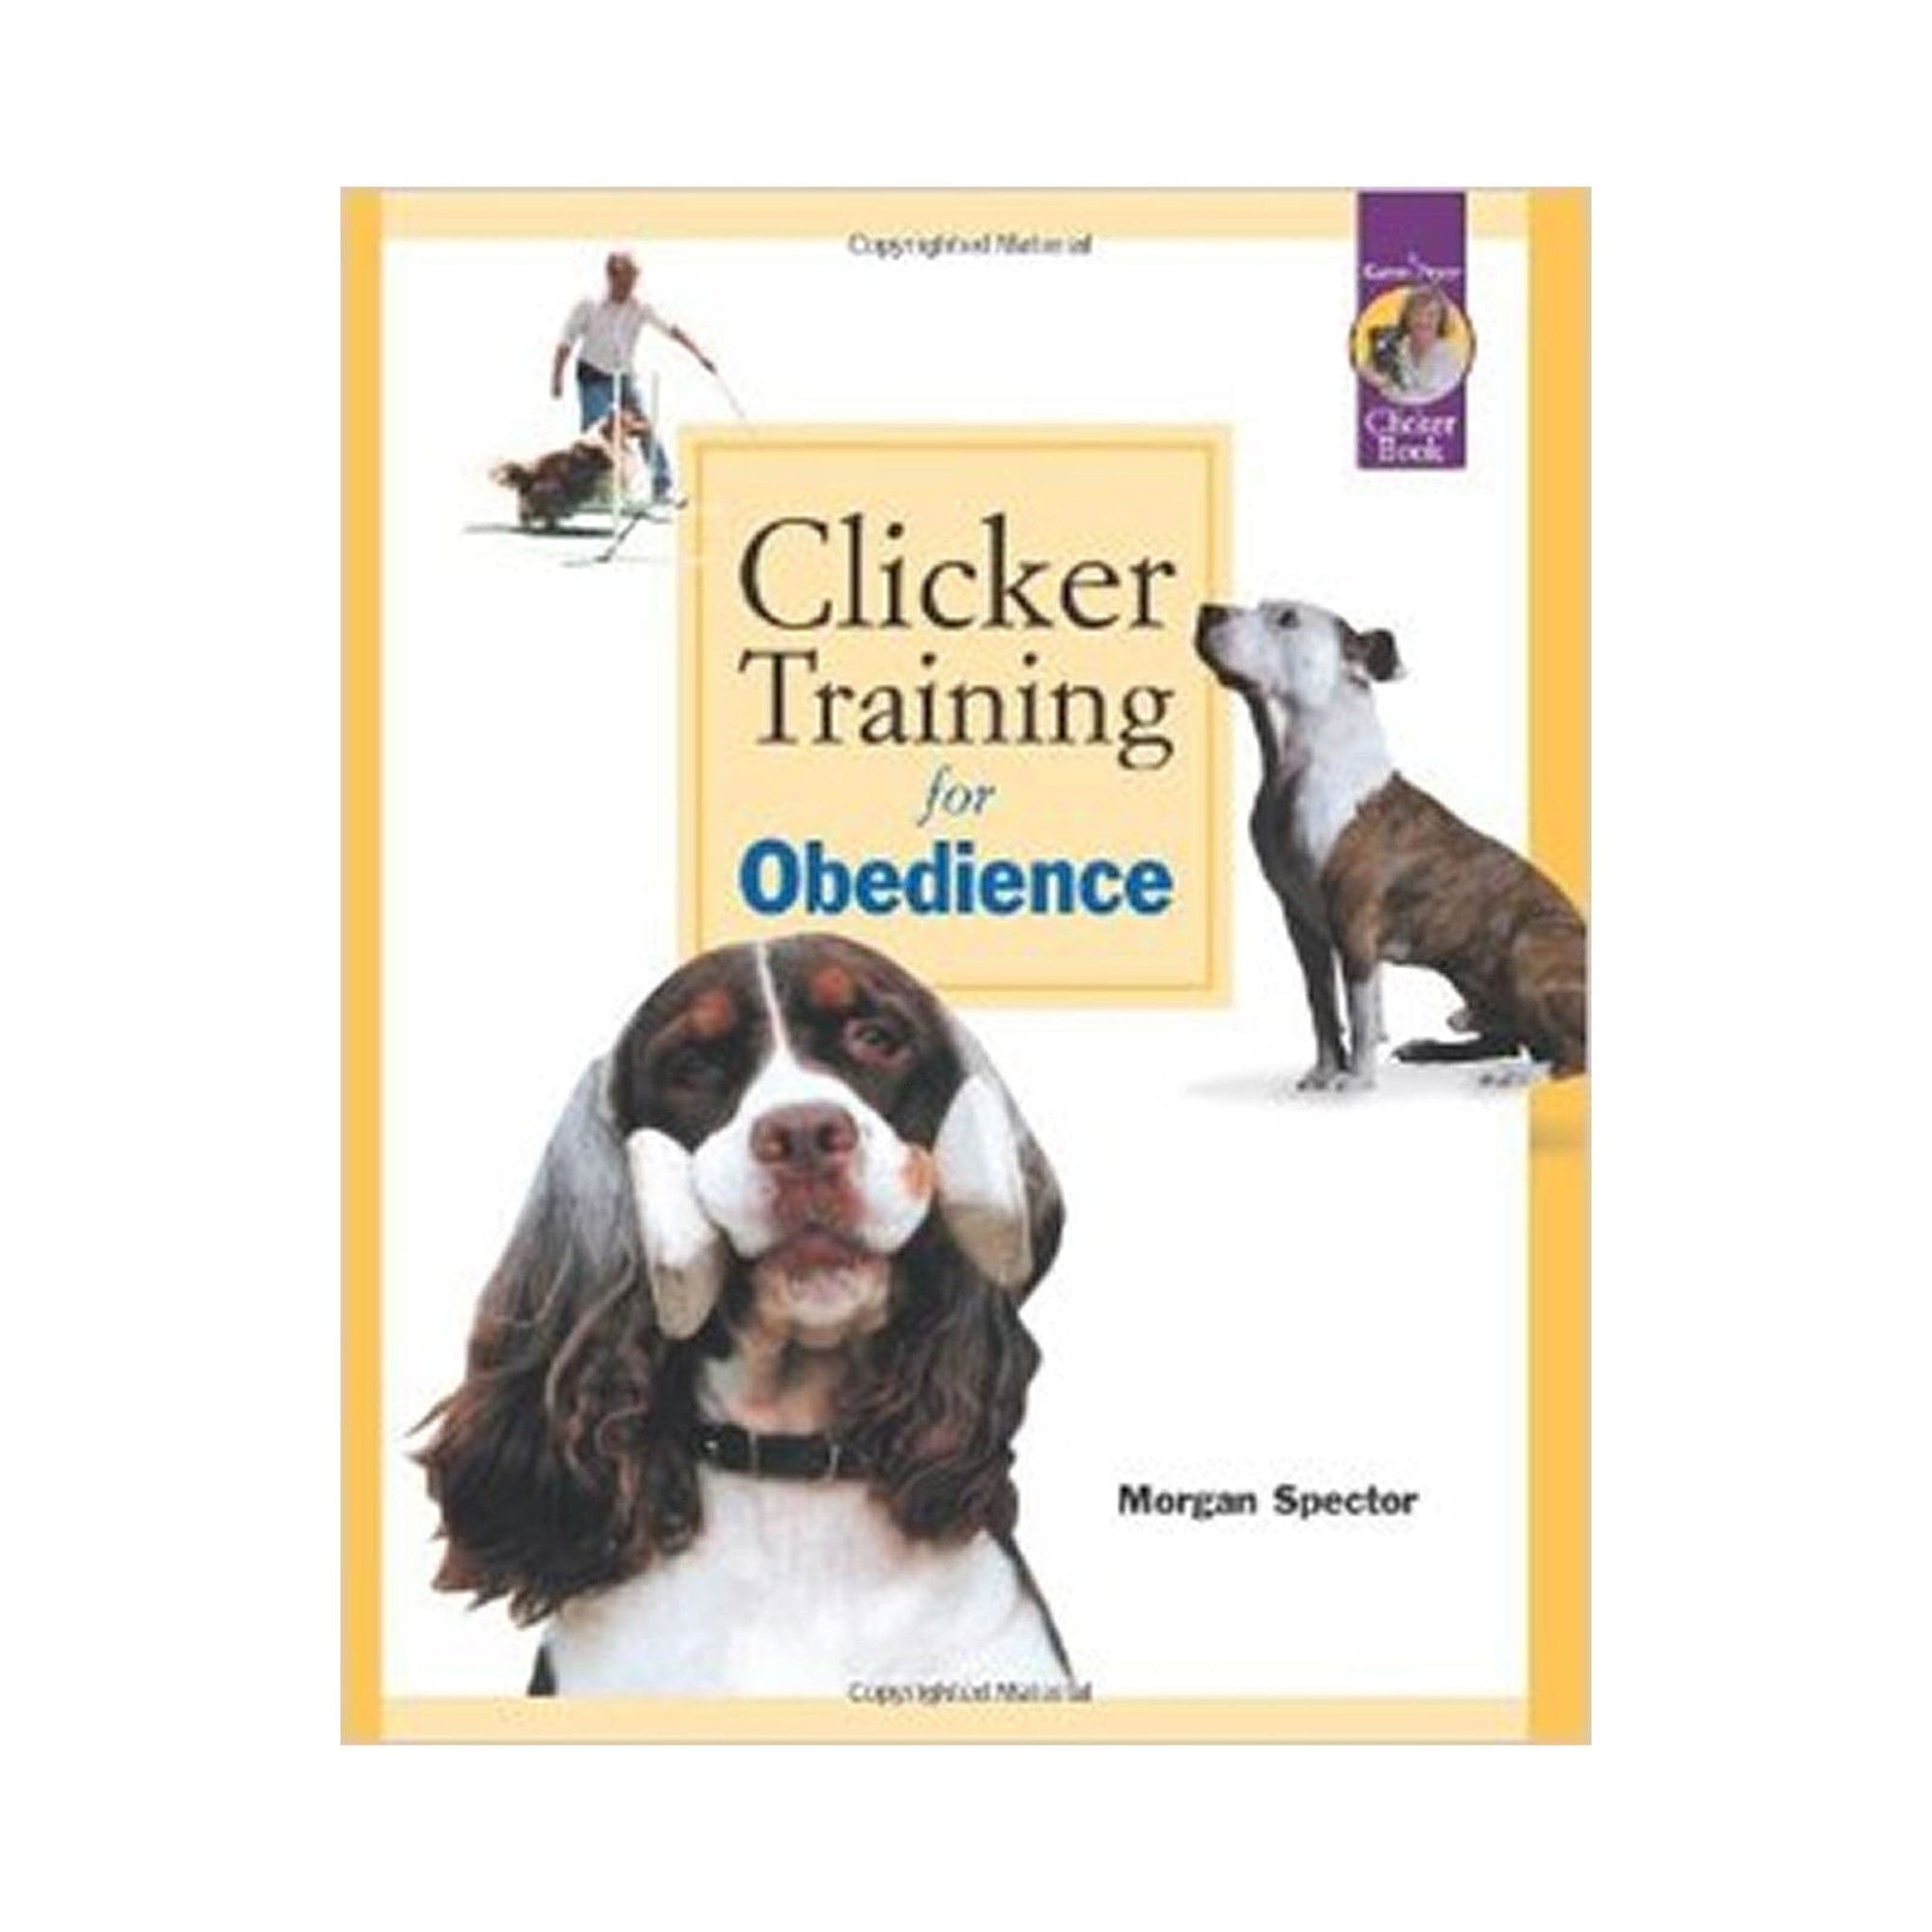 E-BOOK Clicker Training for Obedience by Morgan Spector